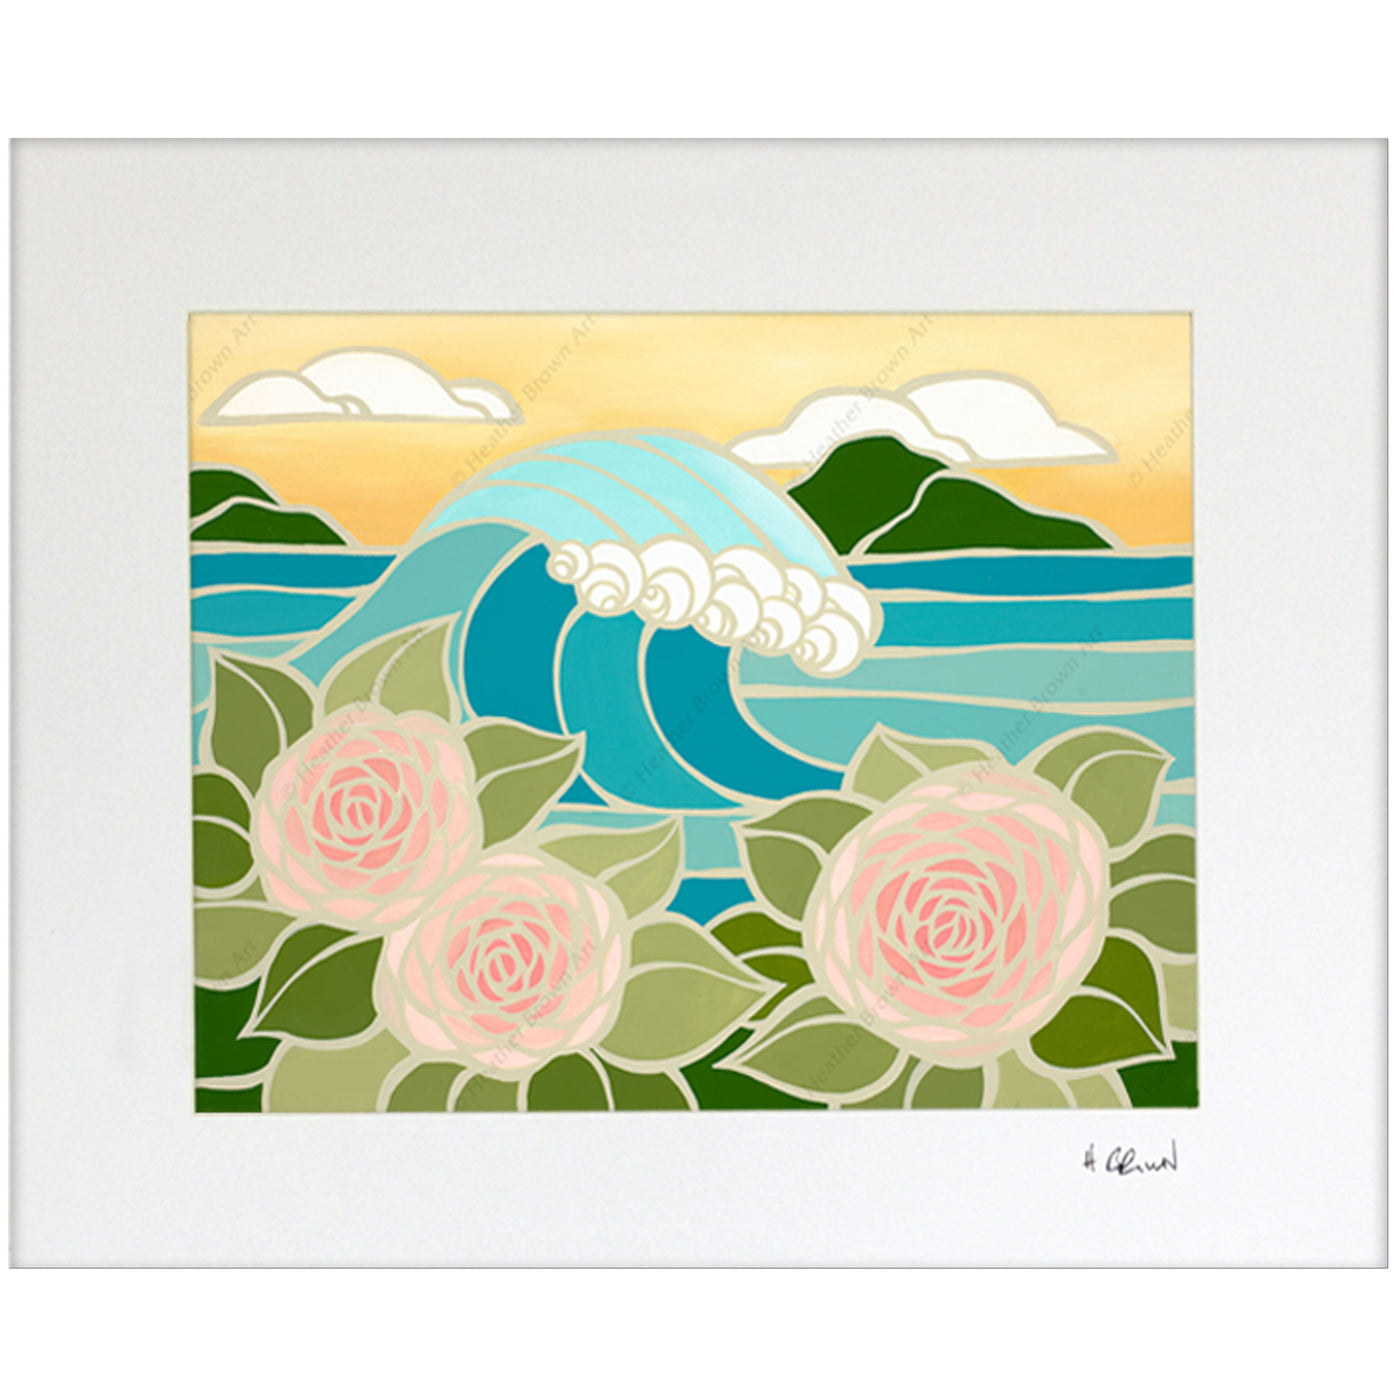 New Year by Hawaii Surf Artist Heather Brown - Matted Print